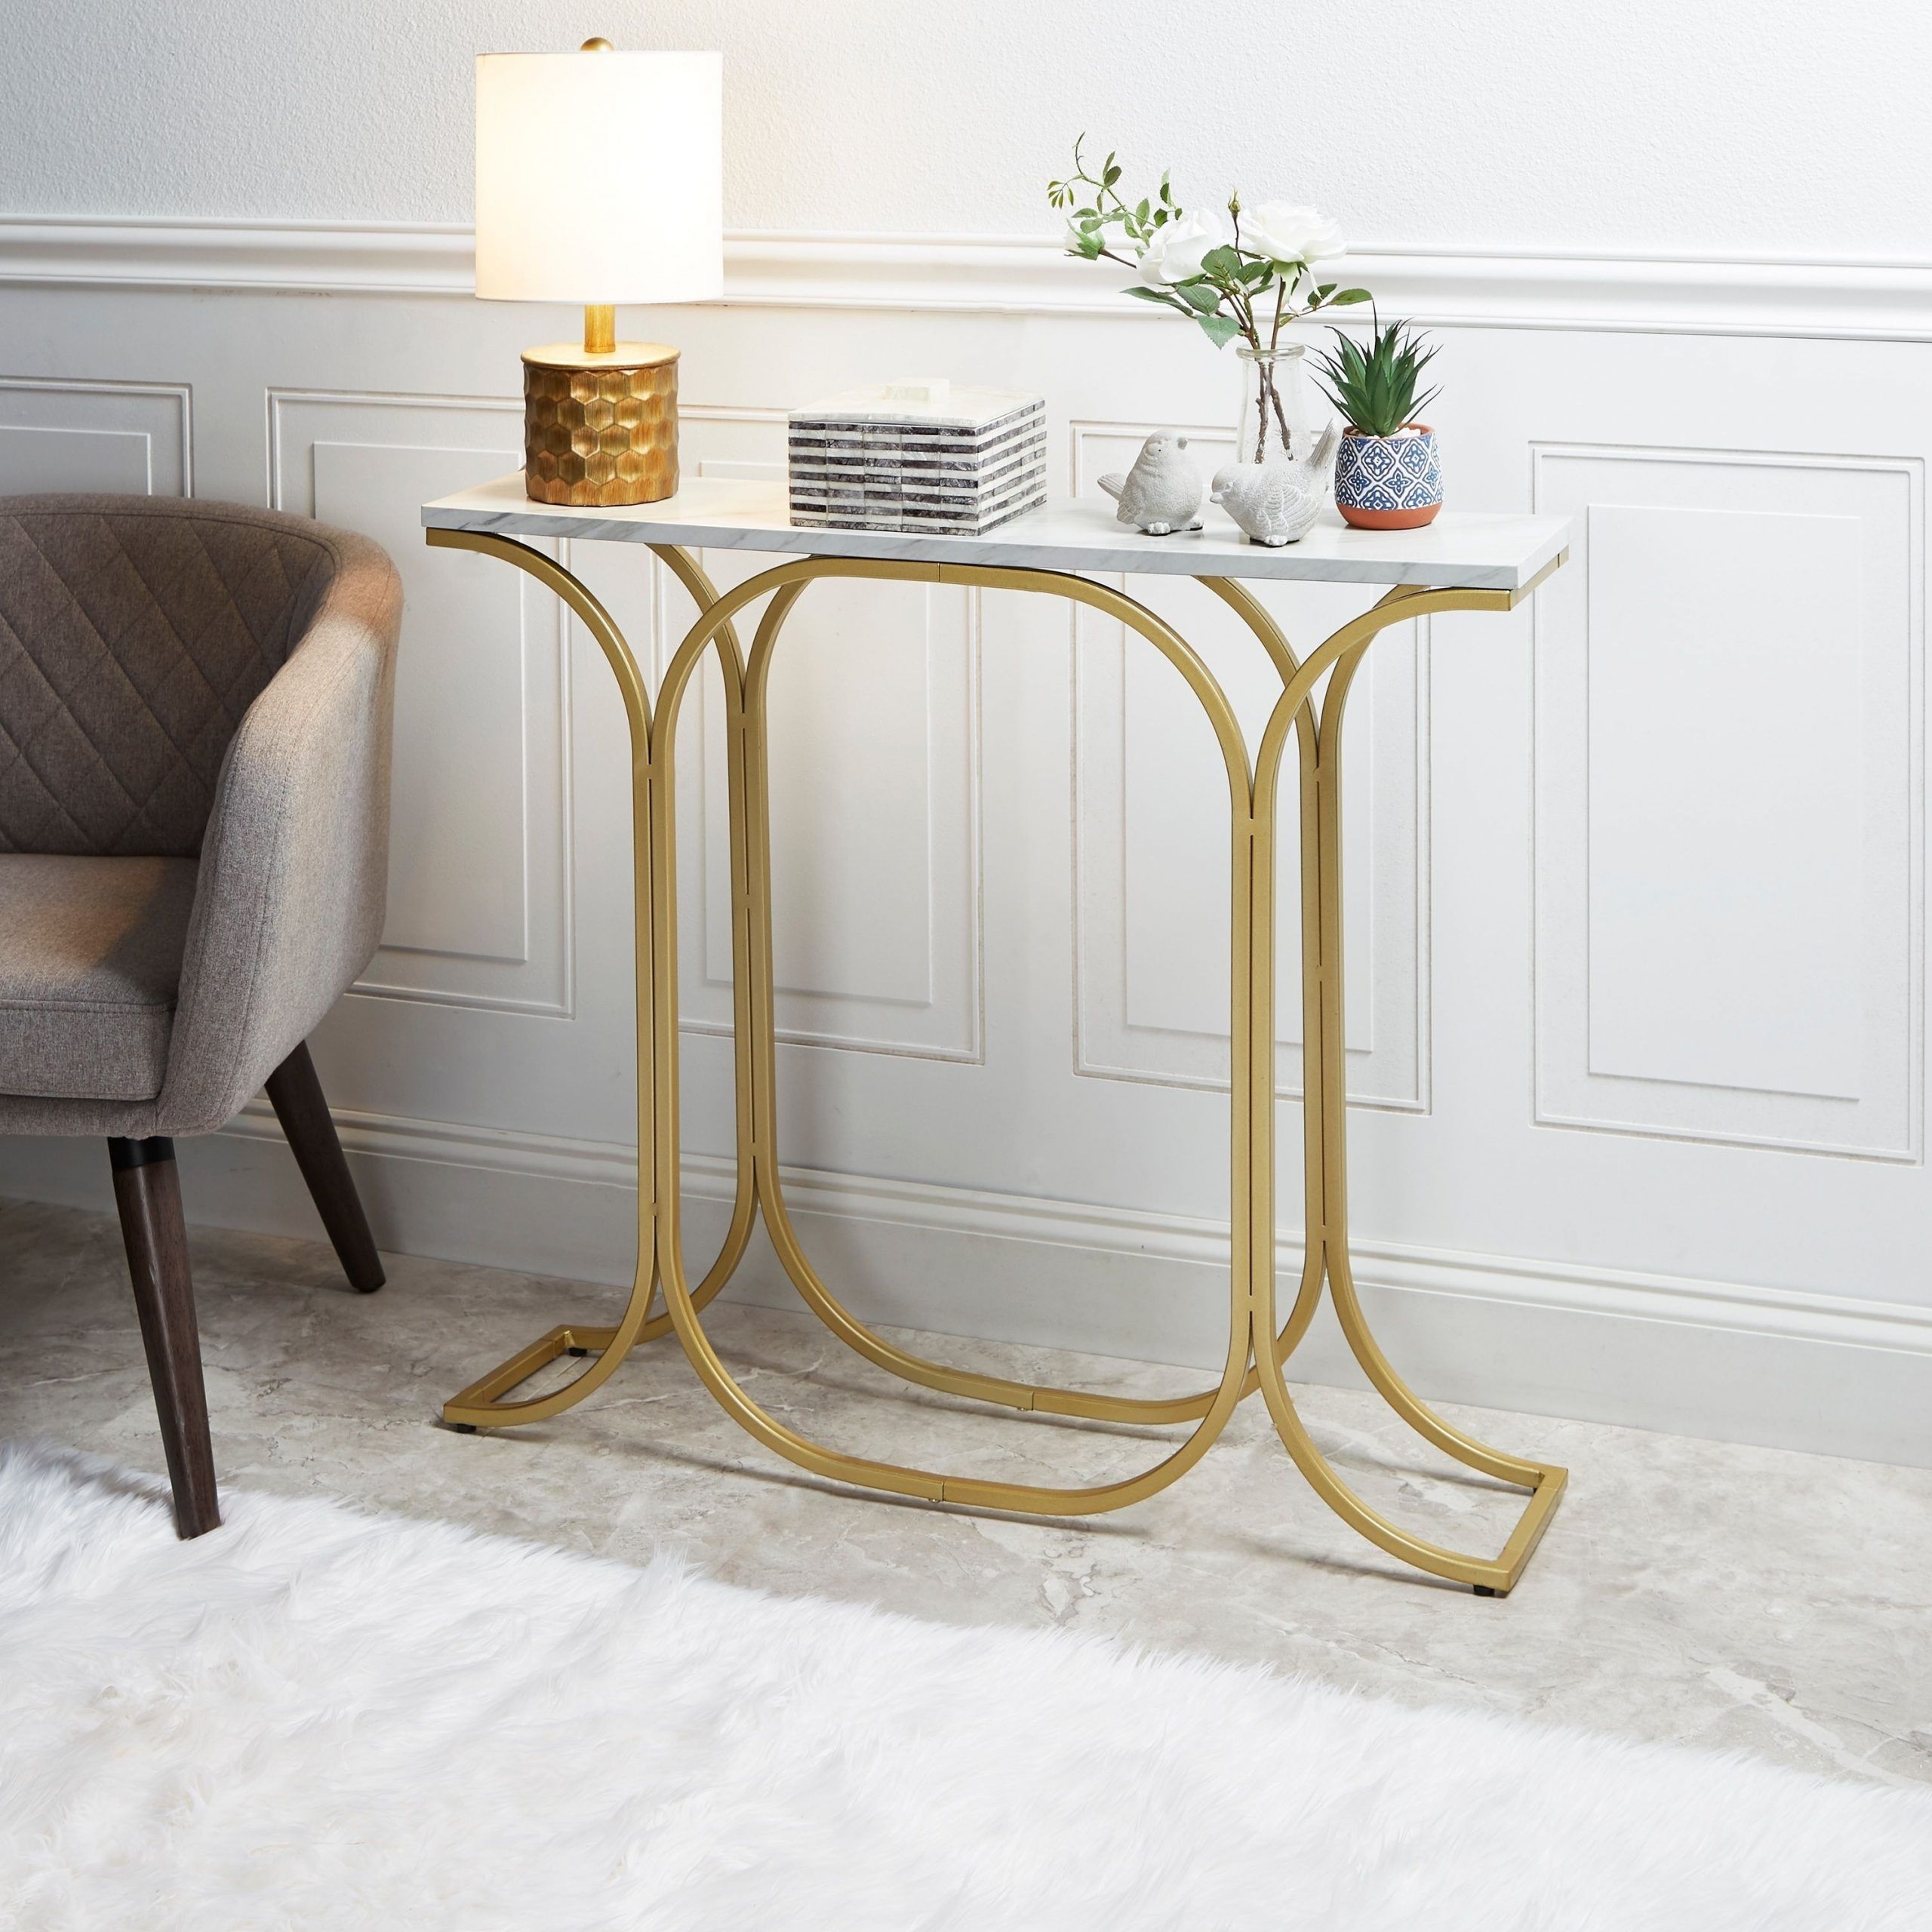 Suzanne Slim Goldtone Finish Console Table With Faux Marble Top In 2020 Throughout Antiqued Gold Rectangular Console Tables (View 1 of 20)